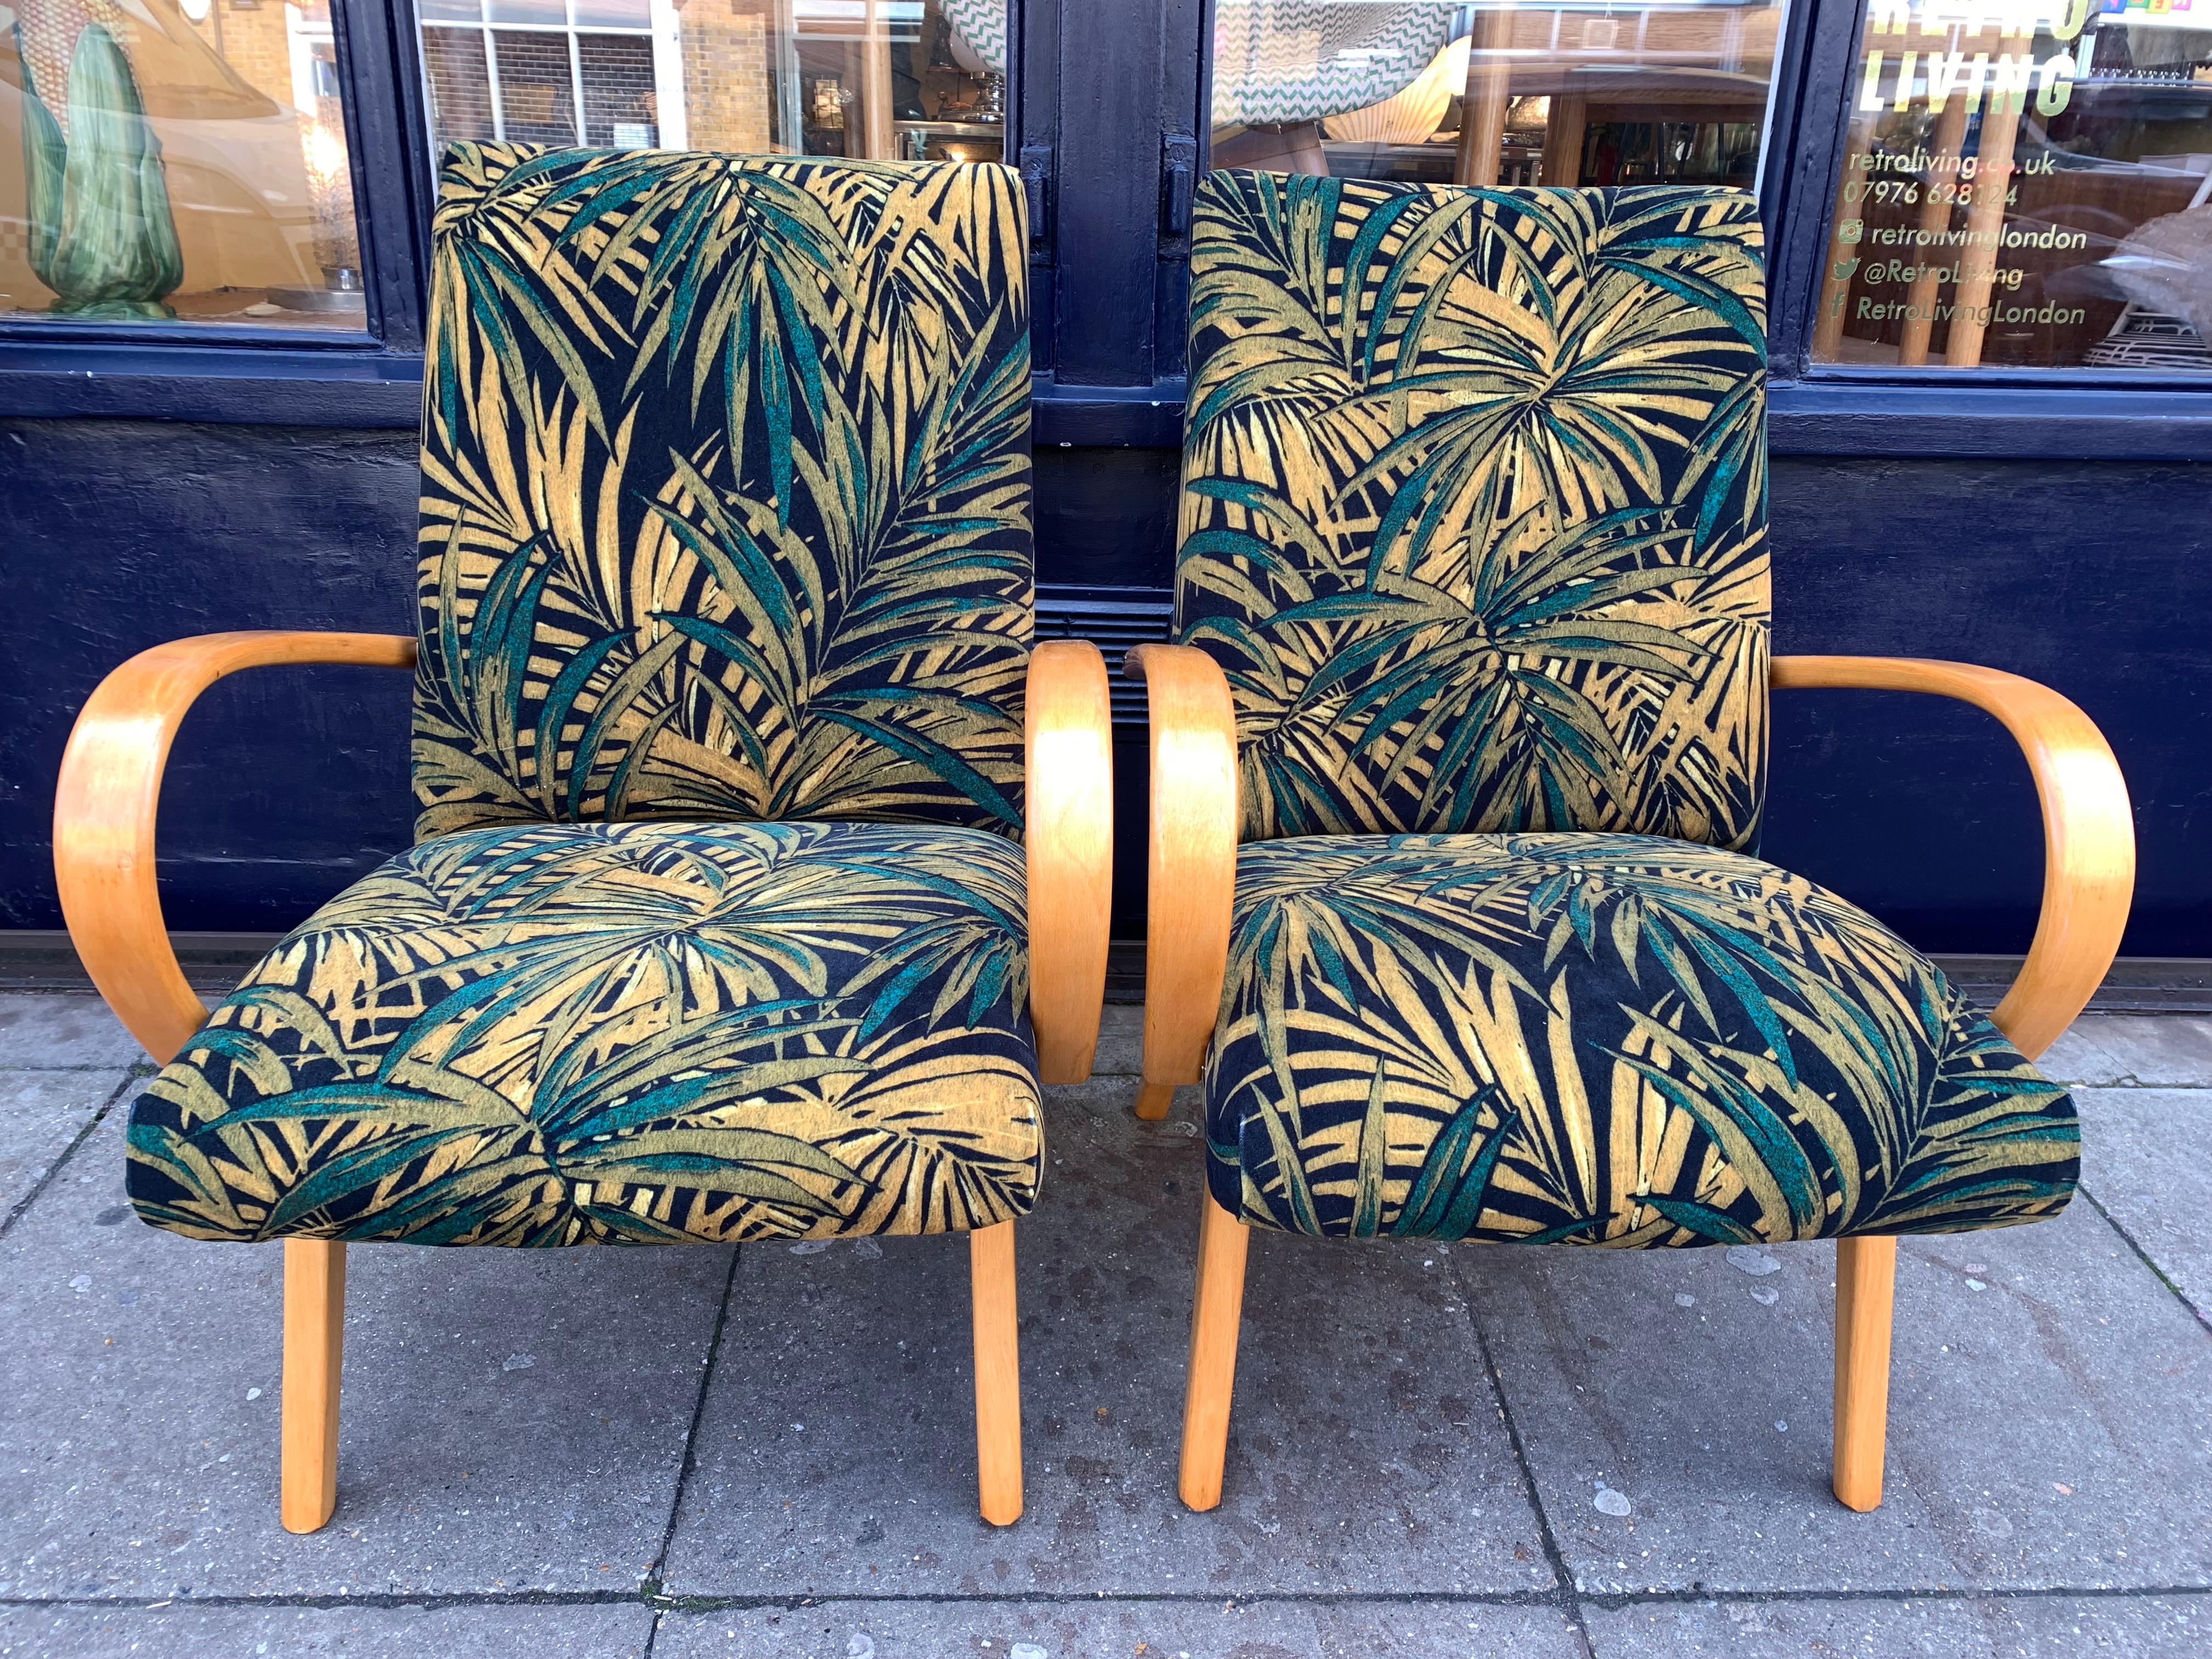 1960s pair of Czech armchairs by Jaroslav Smidek for Ton Factory. Beautifully restored and reupholstered in contrasting green palm fabric from Linwood Fabrics. The frames are made from Purified beech which contrast and highlight the colours and